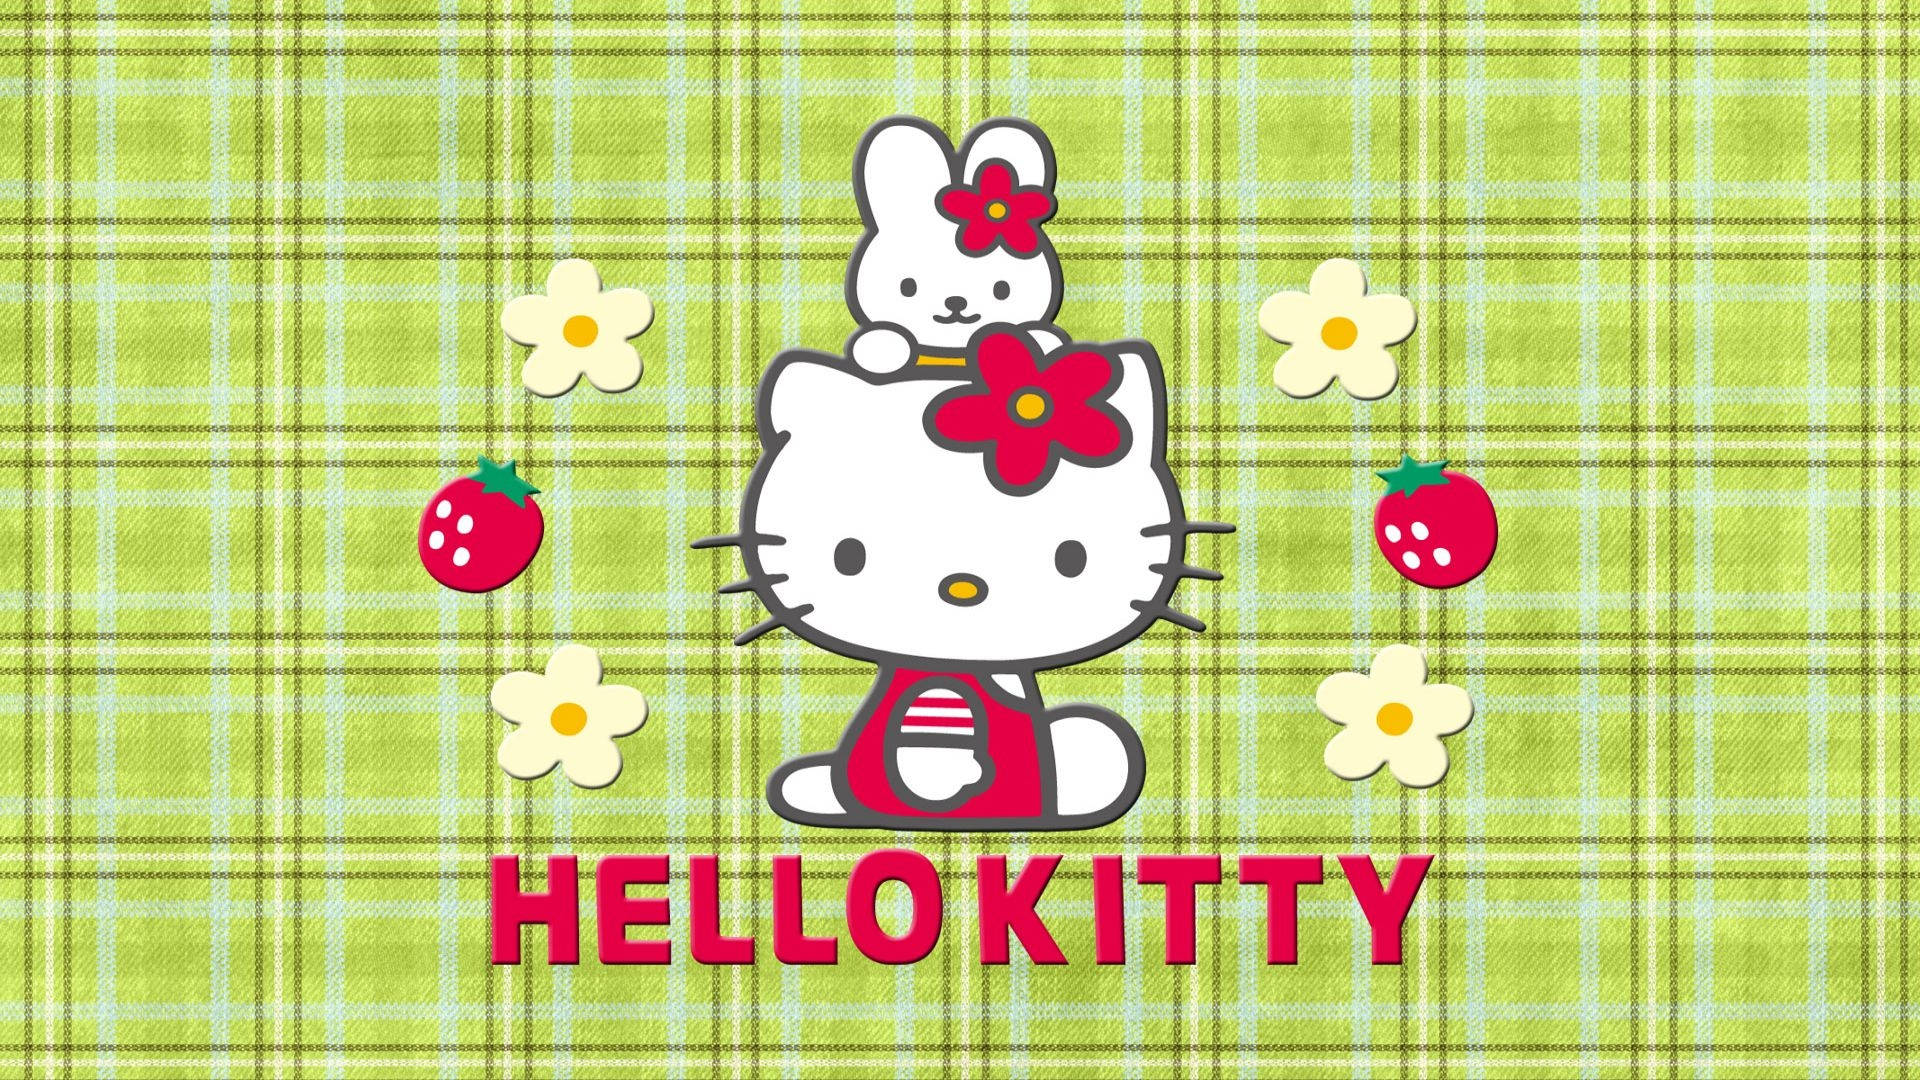 Kathy And Hello Kitty Aesthetic Background